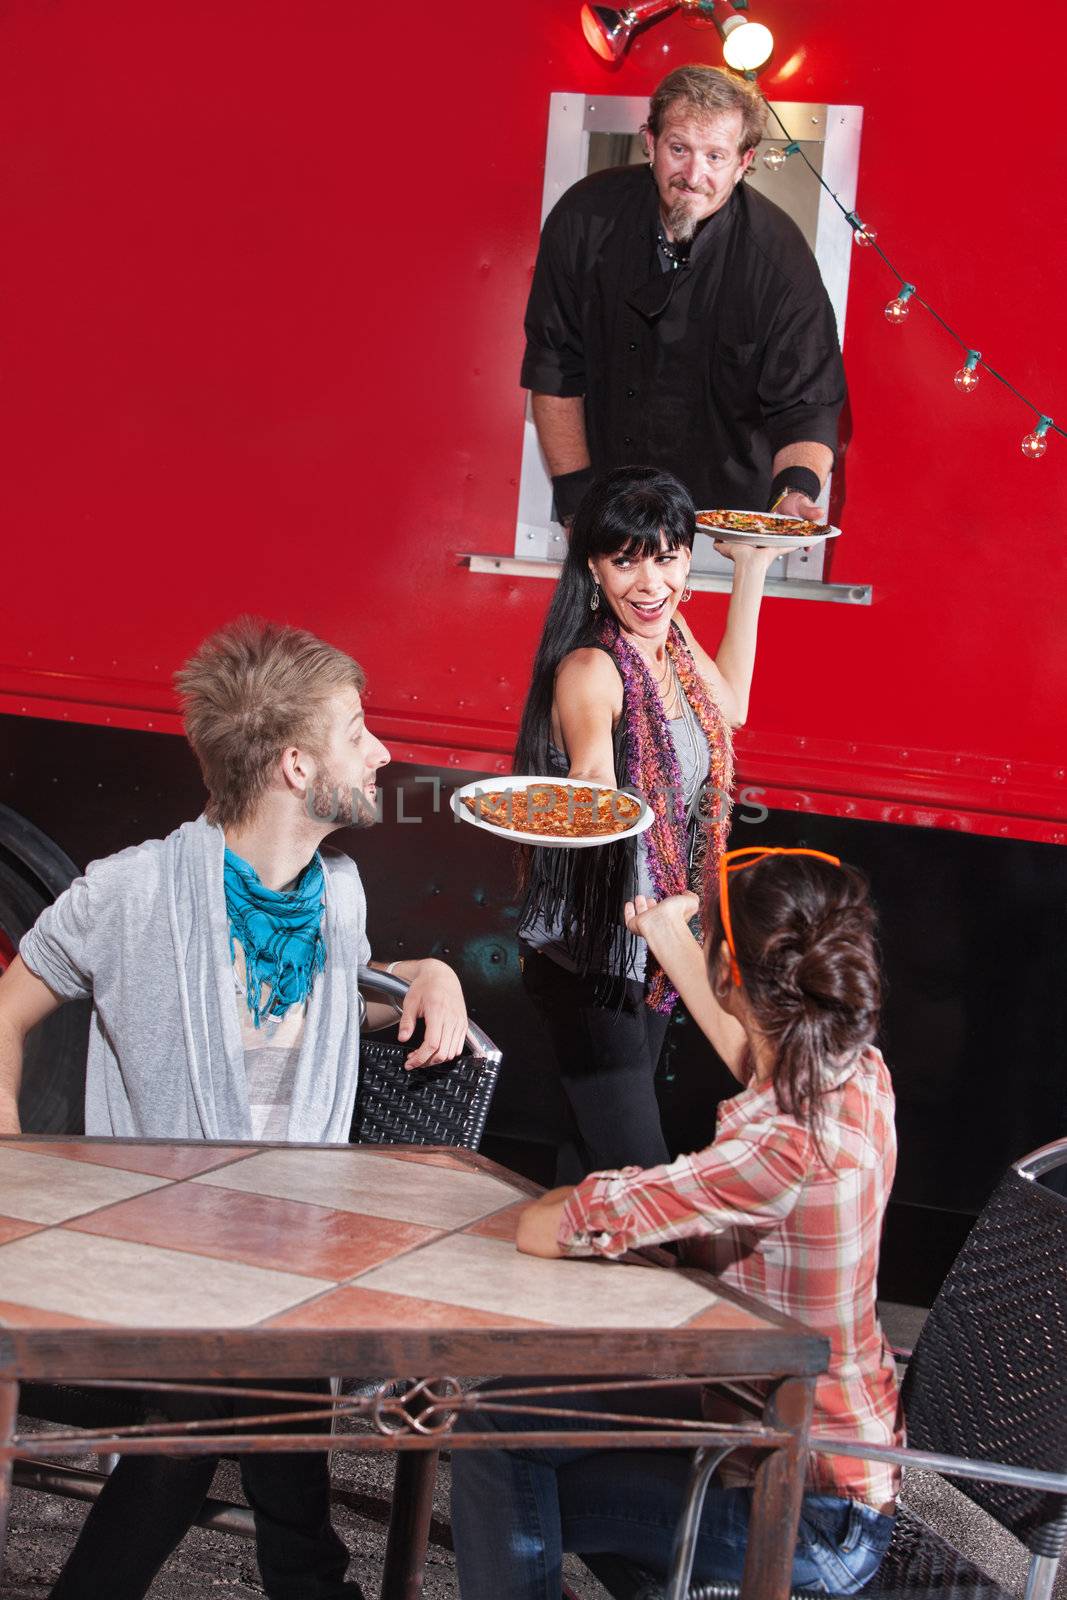 Friends Get Hot Pizza from Truck by Creatista